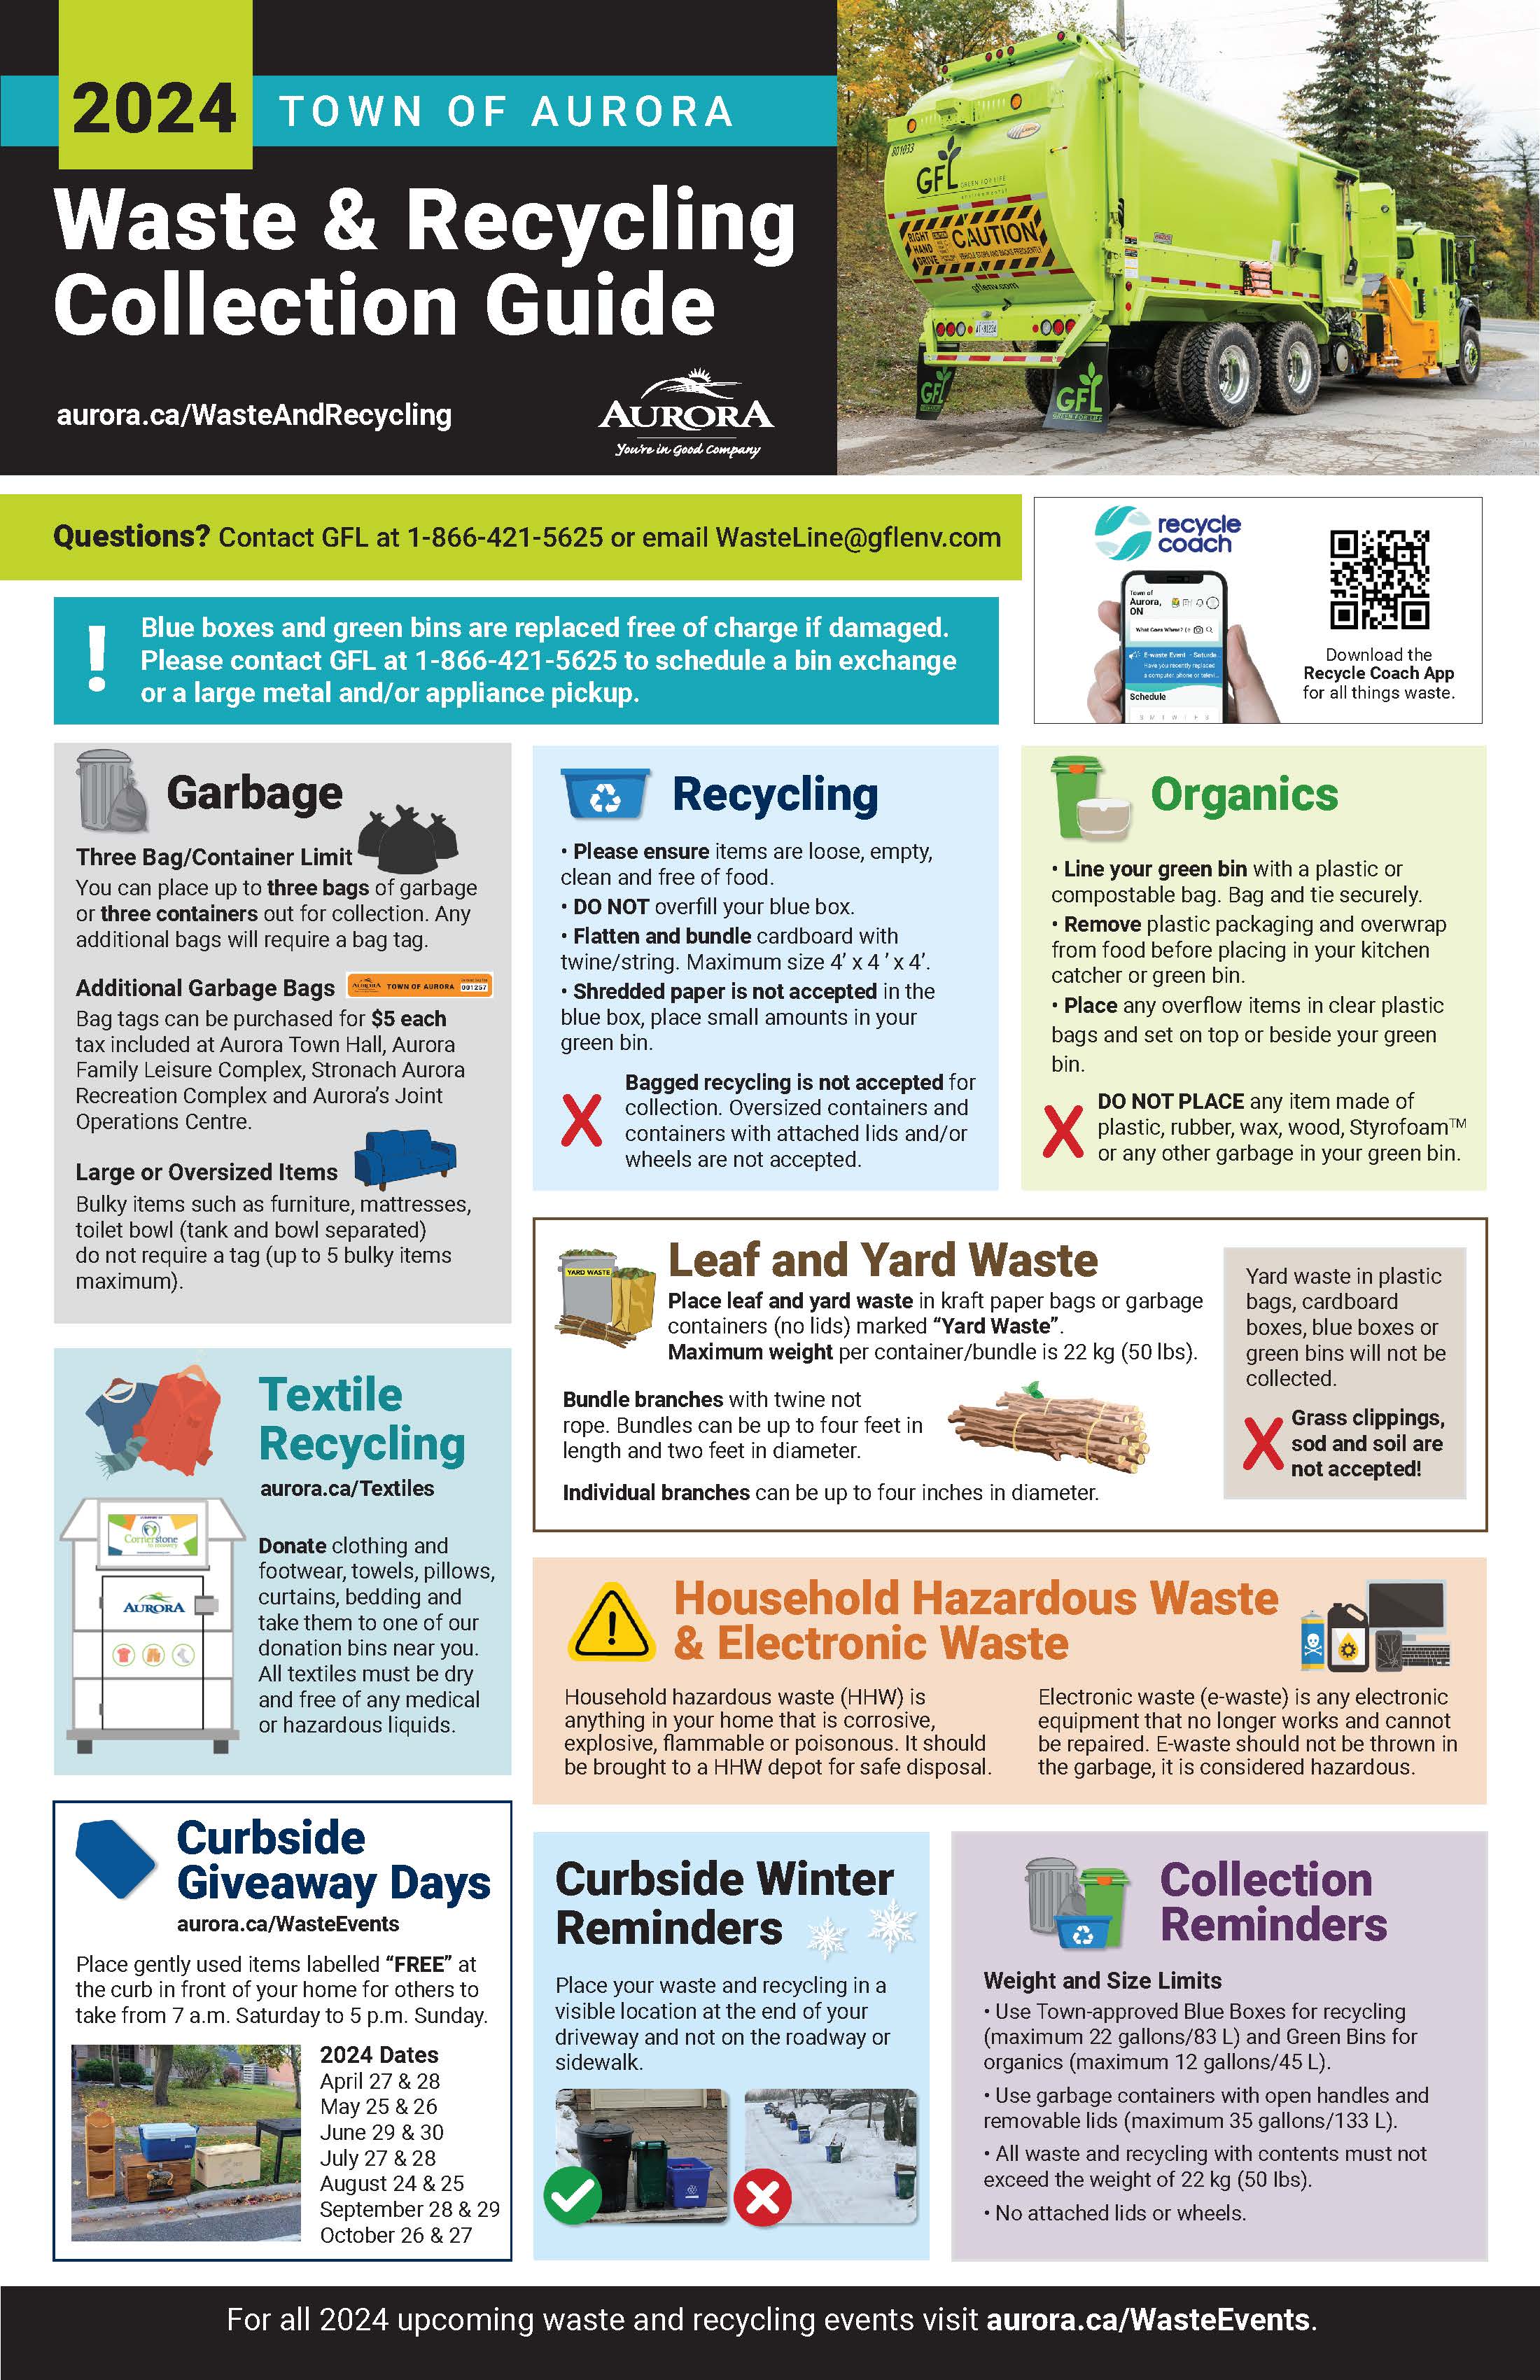 Image of front page waste calendar